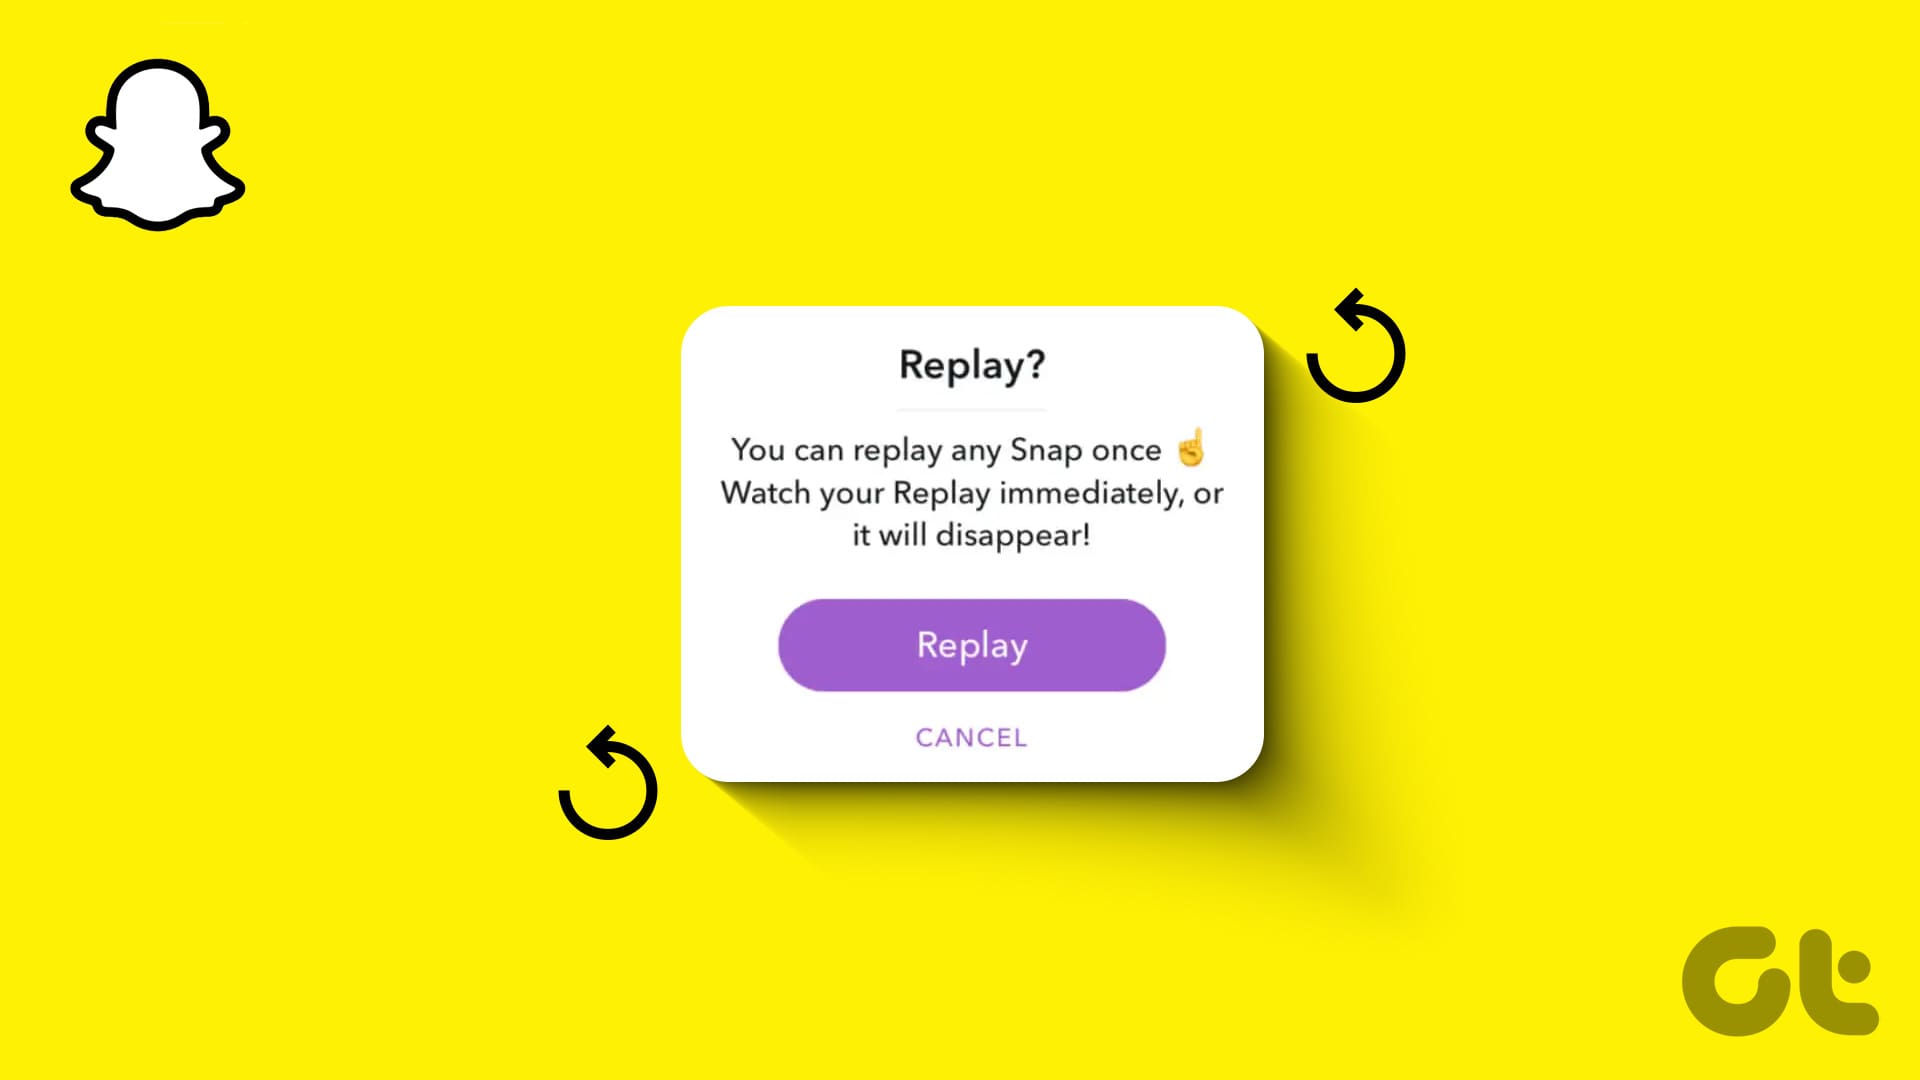 How to Reopen or Replay Snaps on Snapchat